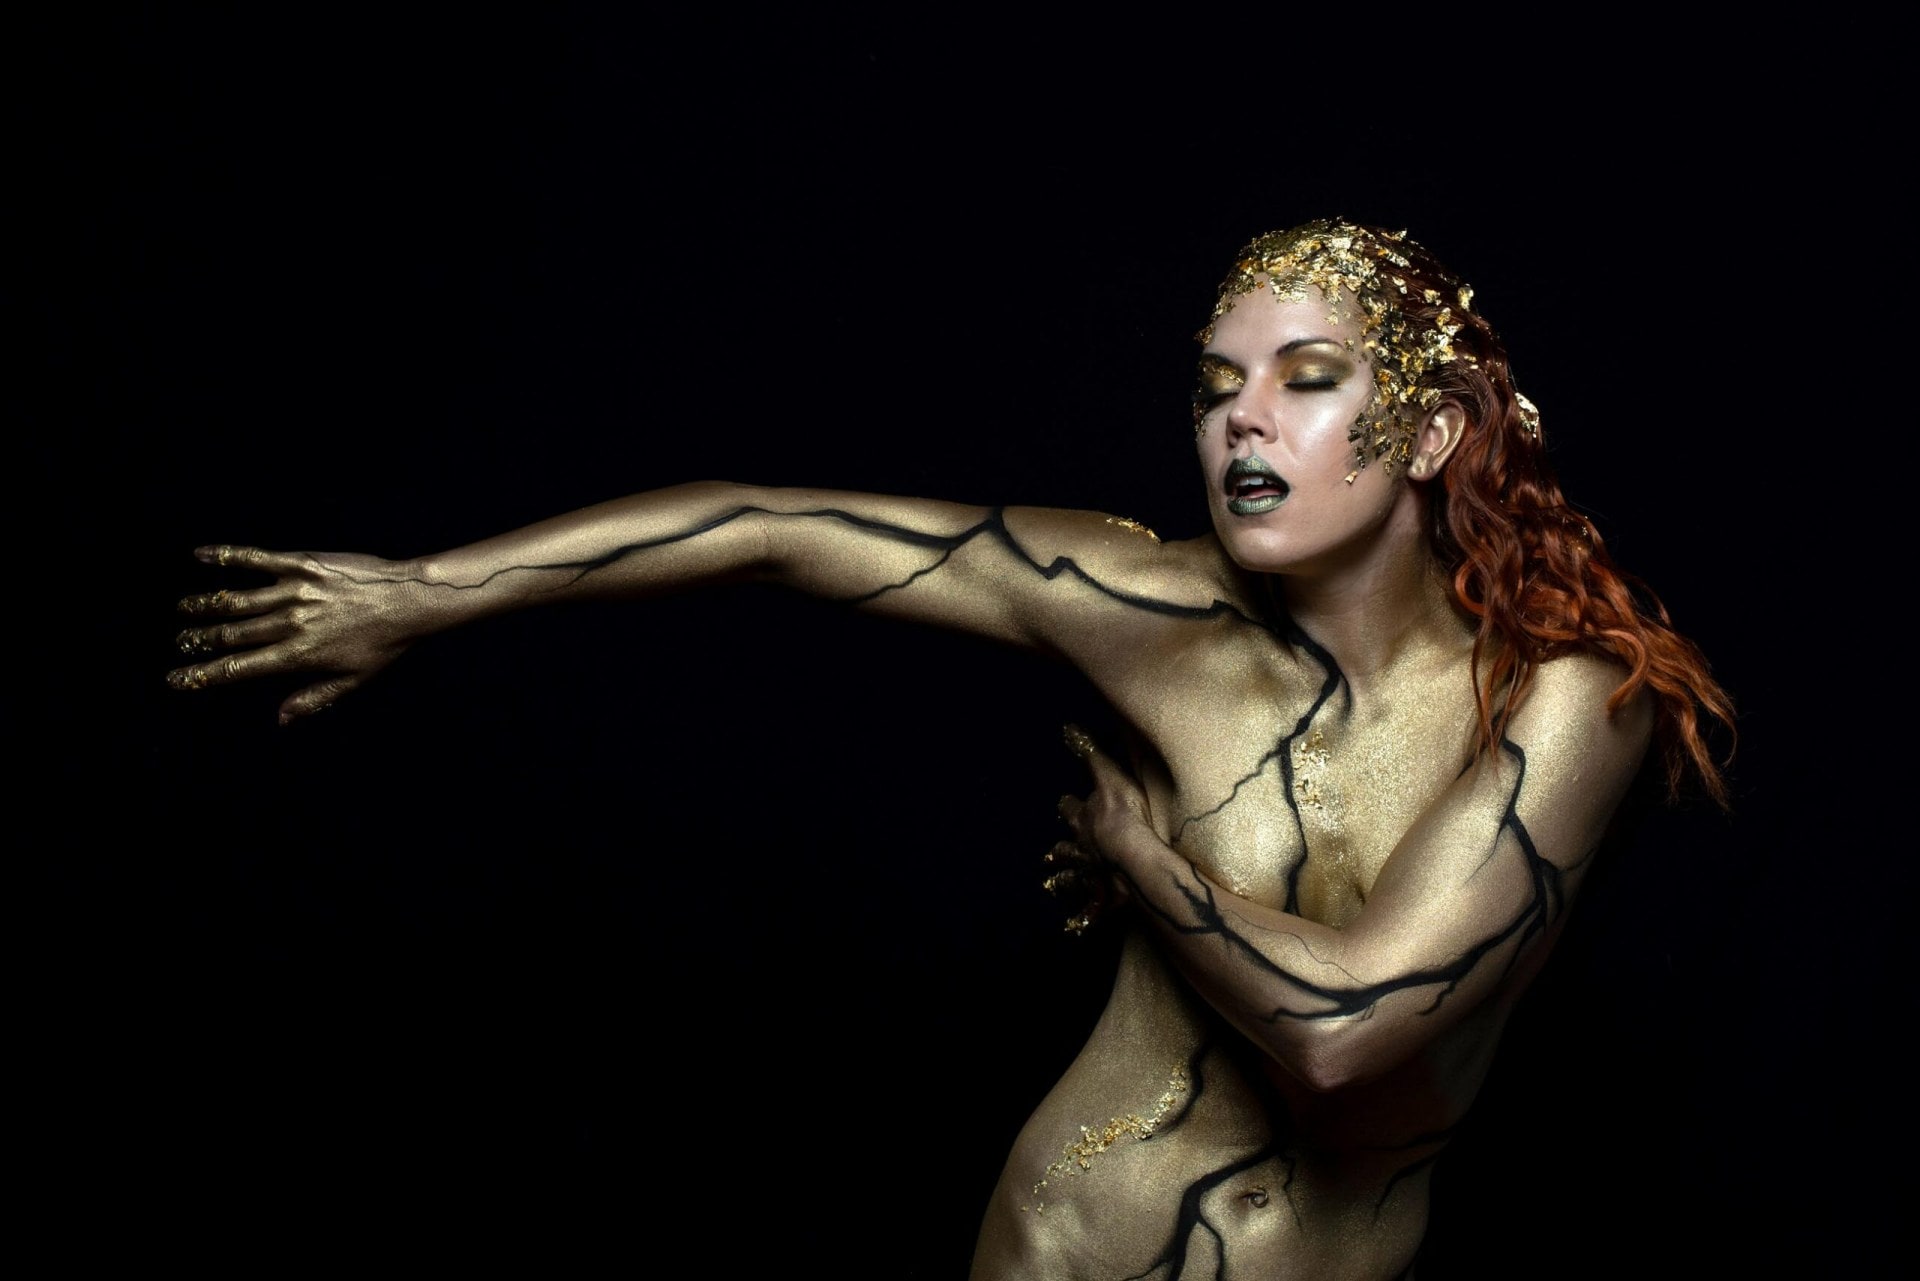 Hannah Tasker-Poland in gold and black body paint